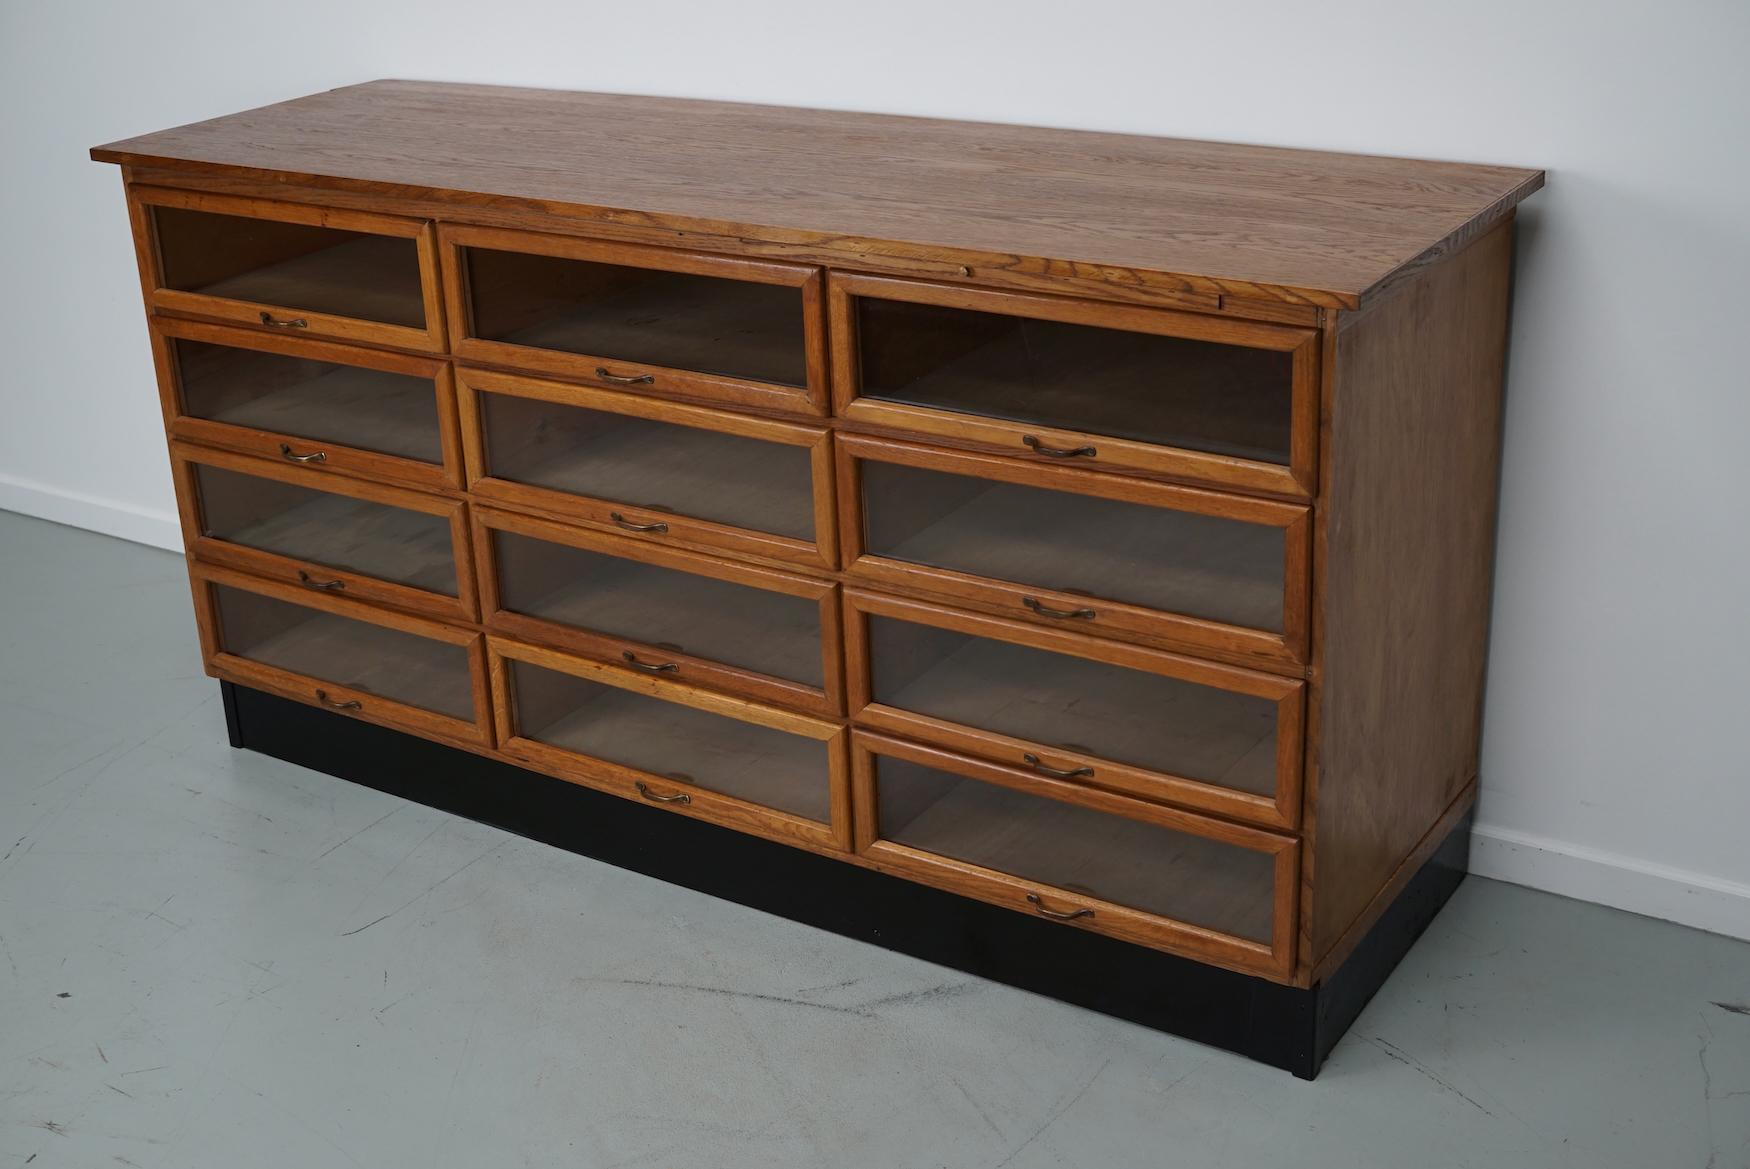 This haberdashery cabinet was produced during the 1950s in the Netherlands. This piece features 12 large drawers in oak with glass fronts and brass handles. It was originally used in a luxury warehouse in the city of Amsterdam. The interior